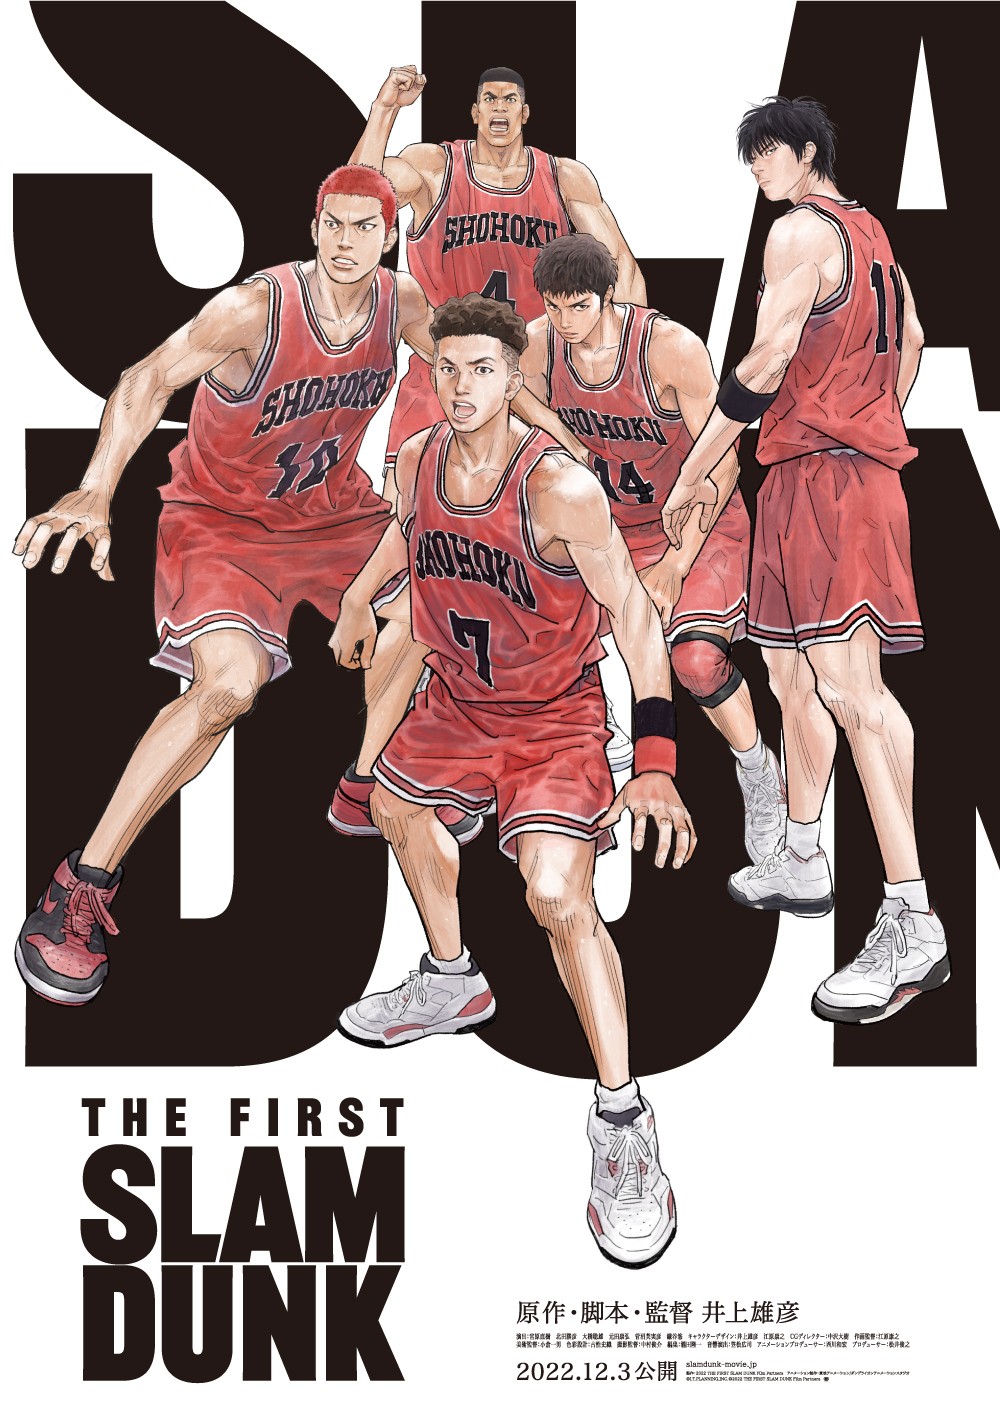 THE FIRST SLAM DUNK』新聞に感謝広告！宮城リョータが「いくぜ 